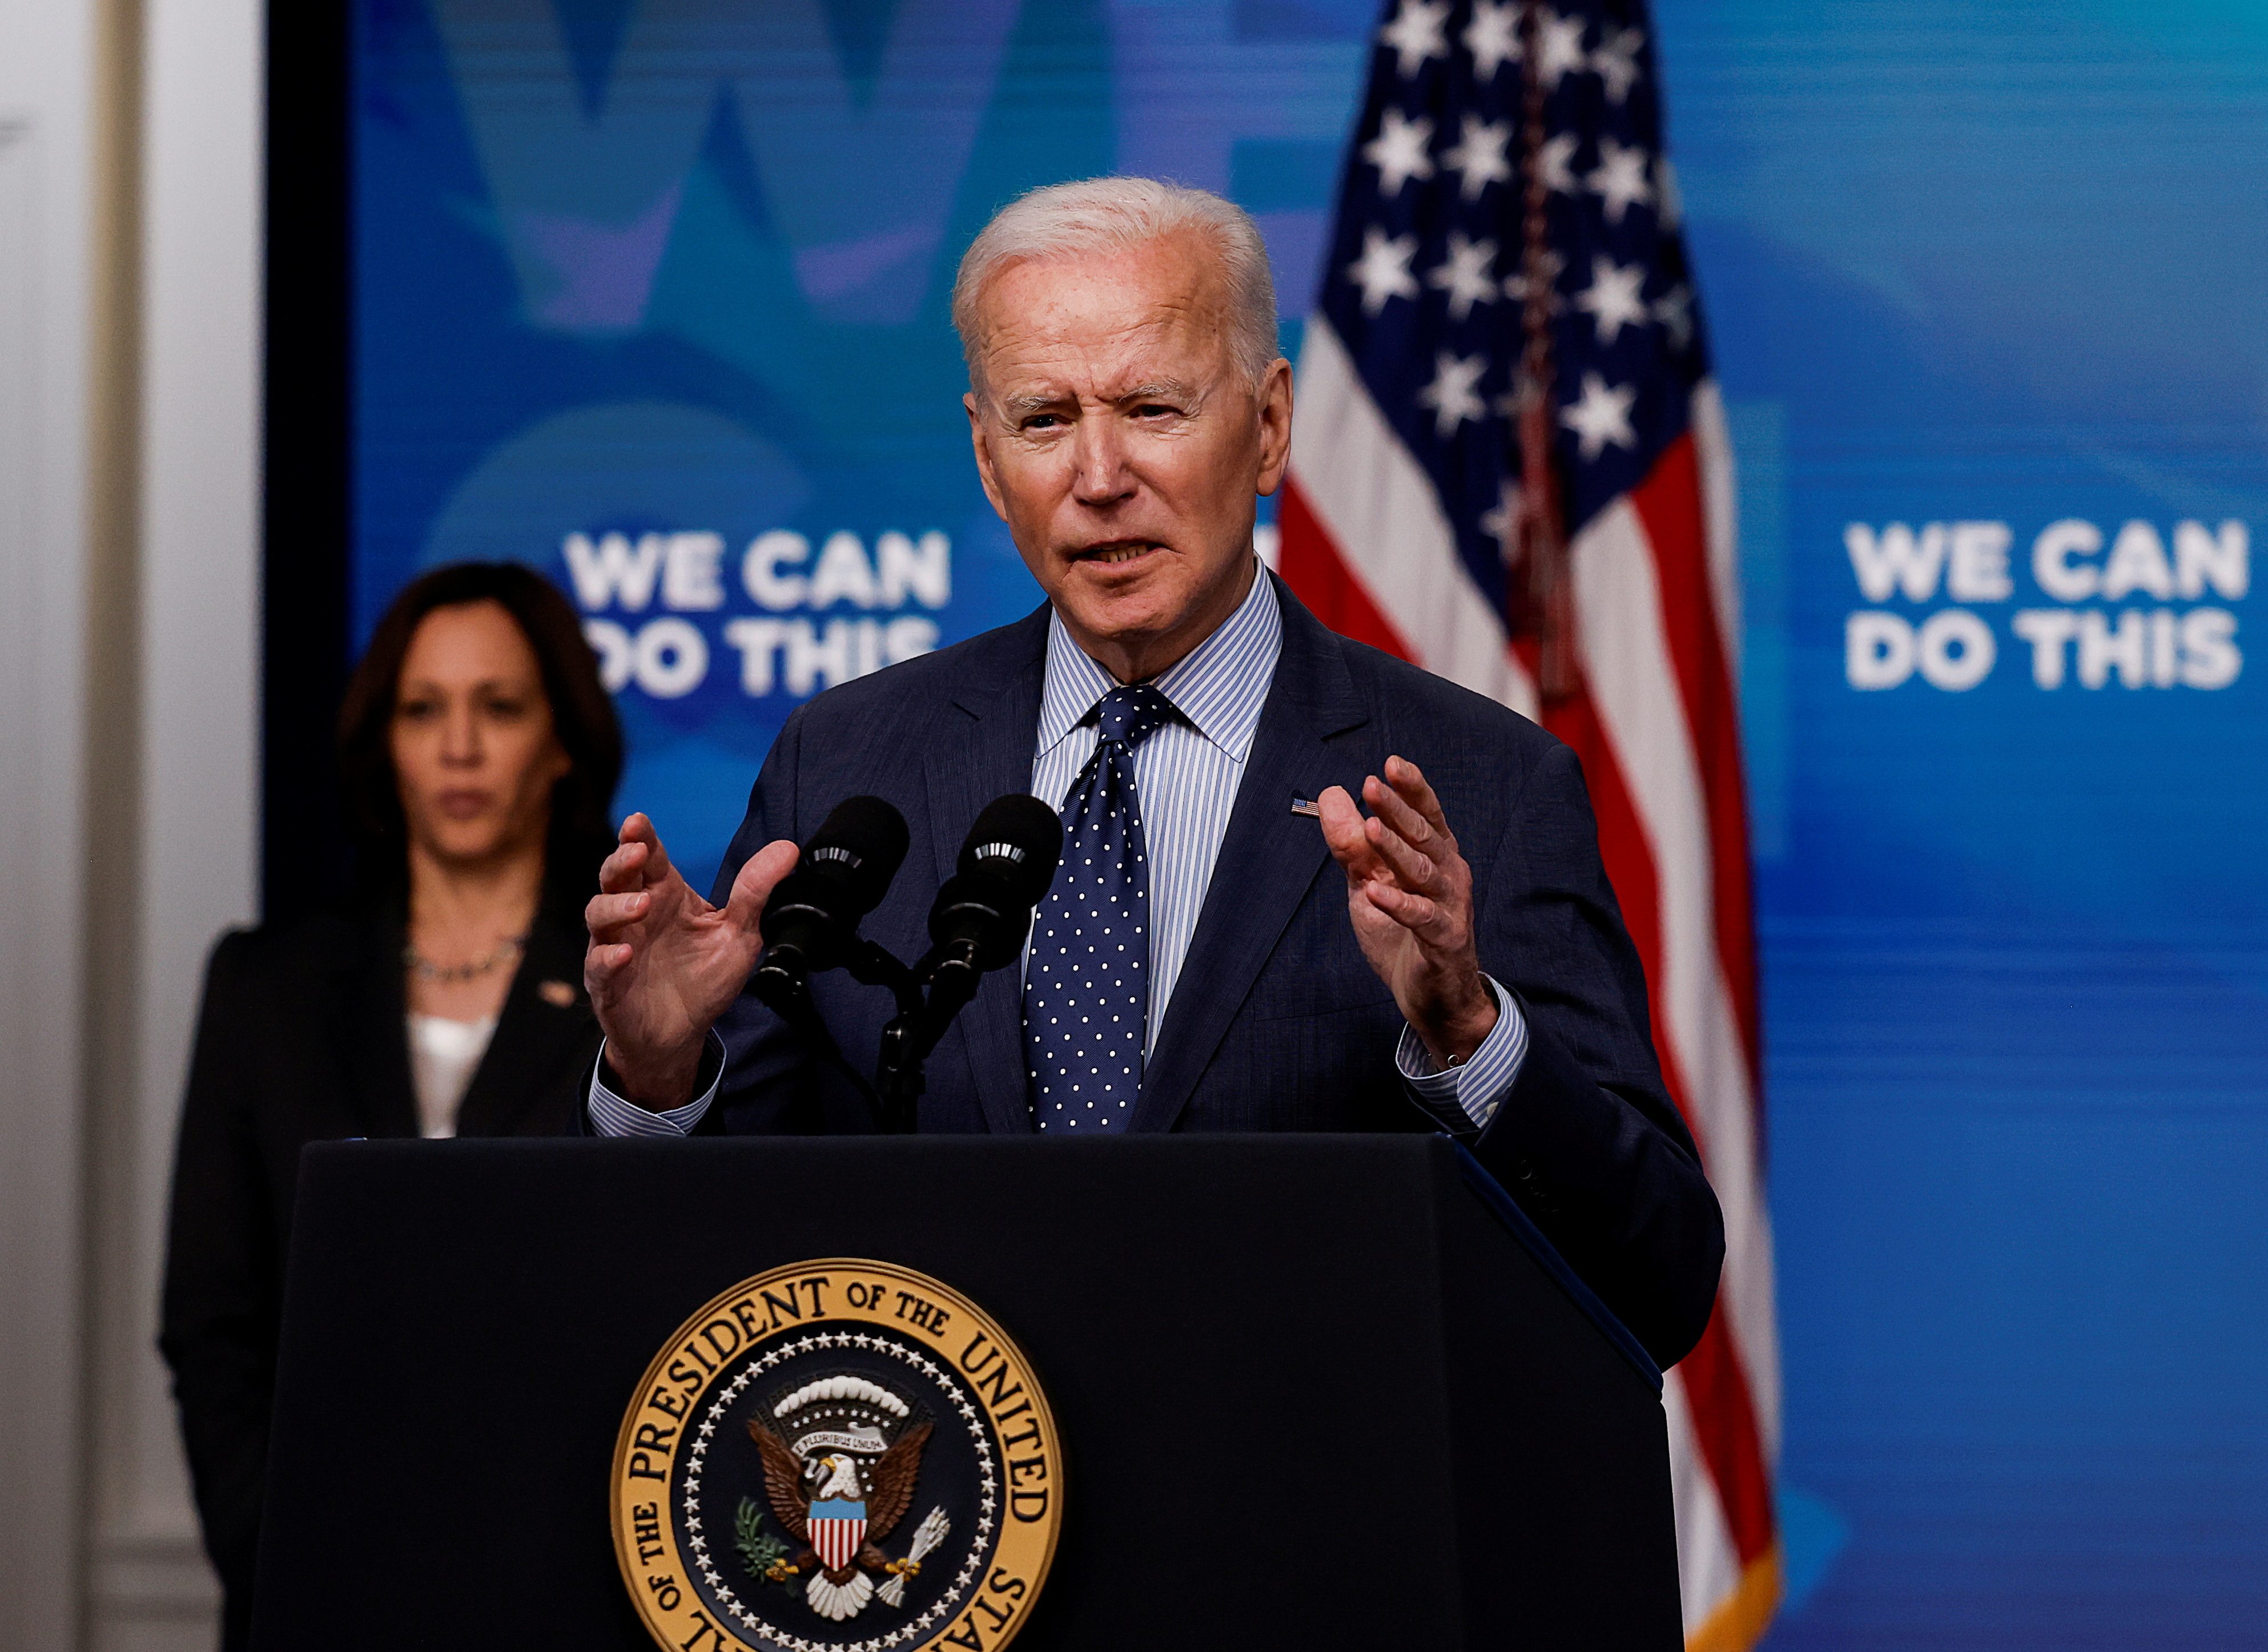 Biden signs ‘Juneteenth’ bill, asks US to reflect on slavery’s ‘terrible toll’